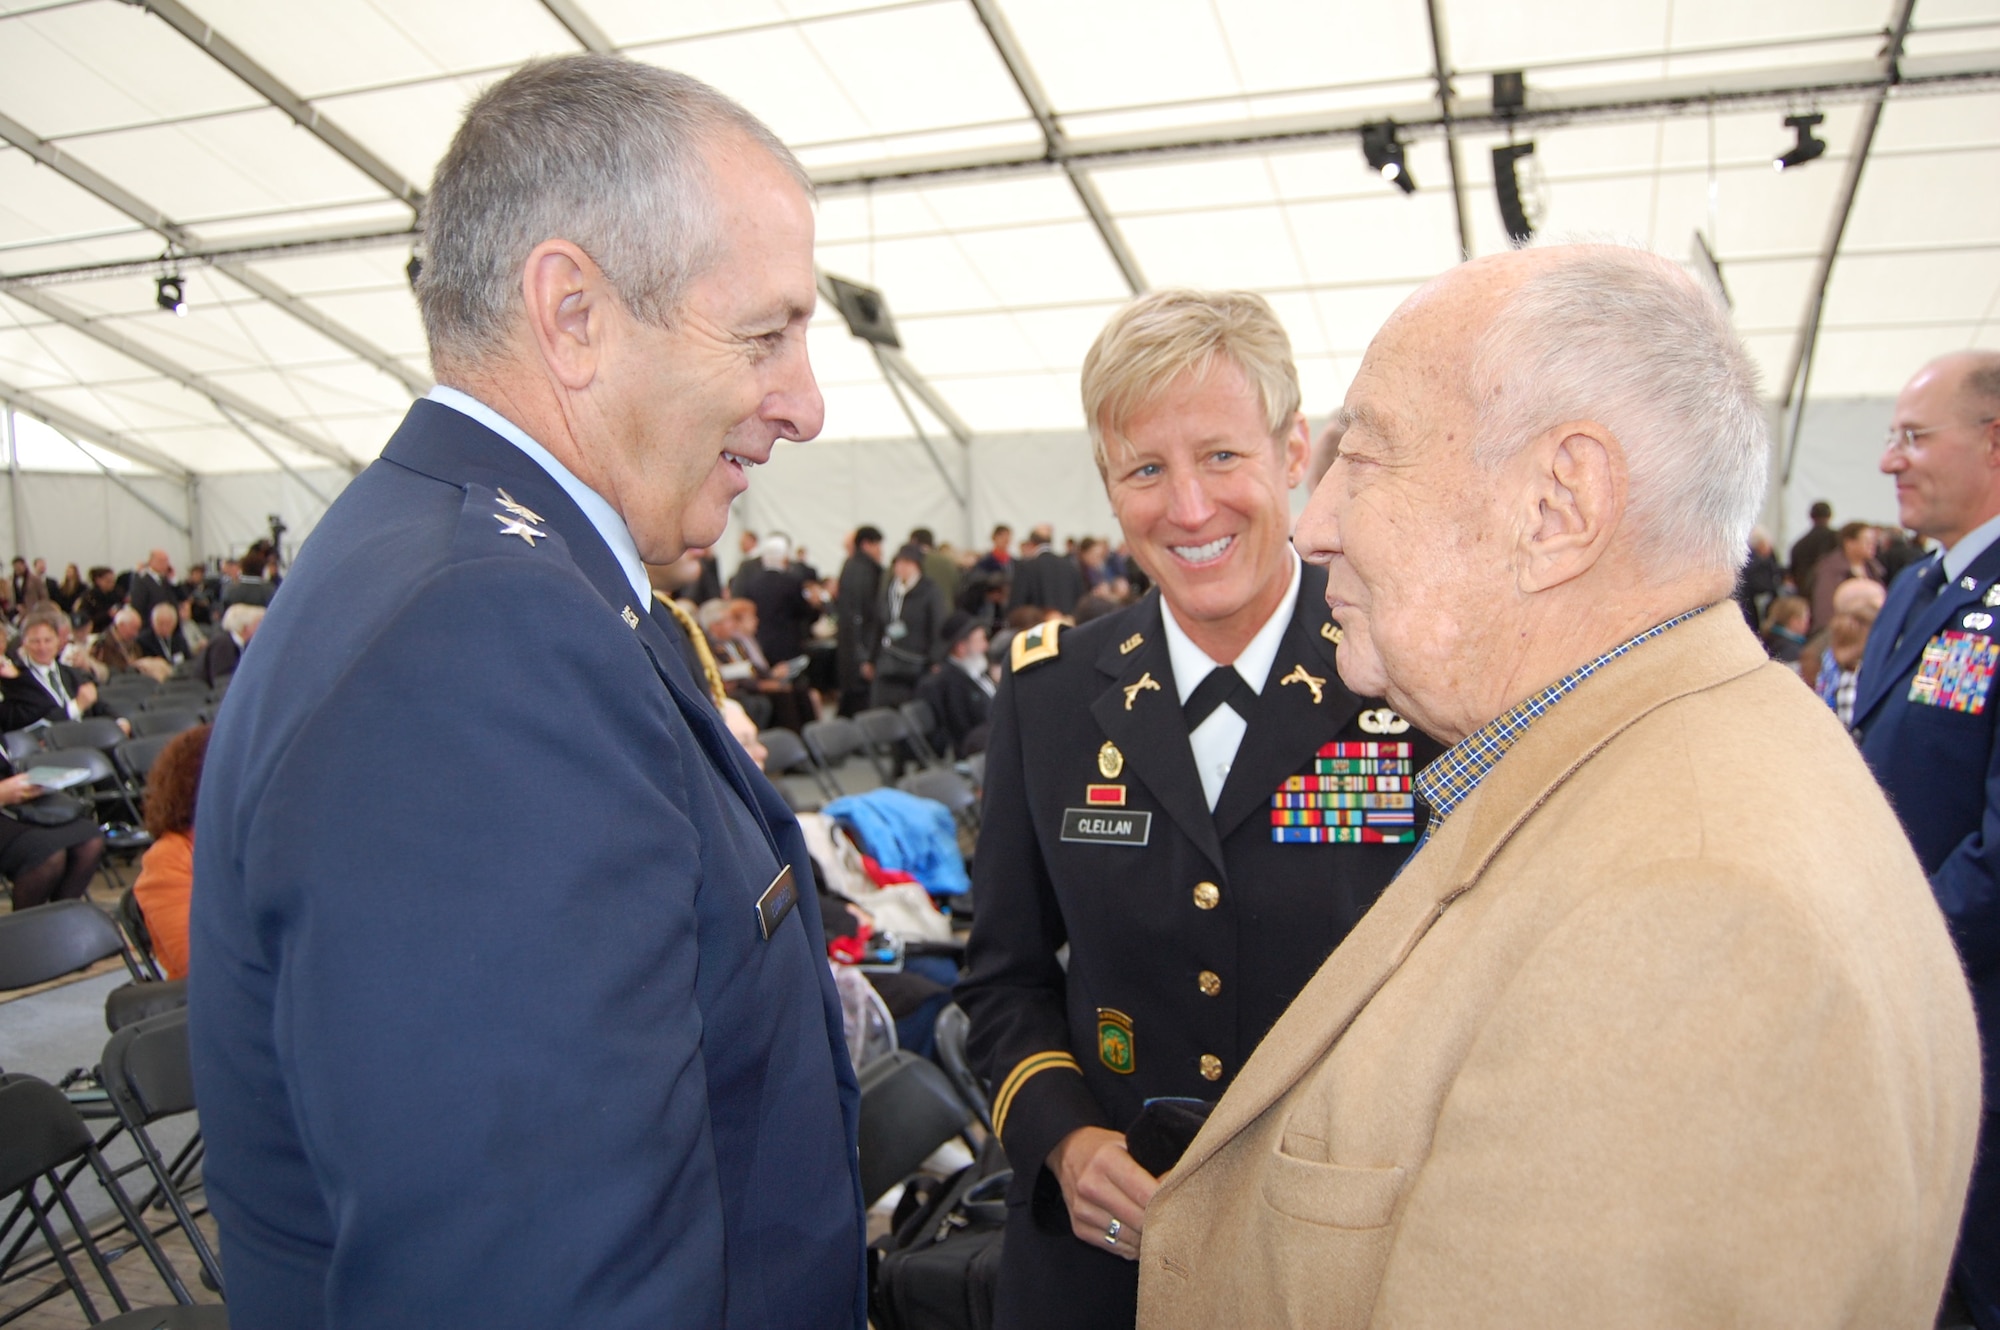 Maj. Gen. H. Michael Edwards, the Adjutant General of Colorado, and Col. Laura Clellan, Land Component Commander for the Colorado Army National Guard, listen attentively to one of the survivors of Dachau Concentration Camp prior to the commemorative ceremony for the 70th anniversary of the liberation of Dachau May 3. Members of these National Guard units participated in various ceremonies May 1-3, 2015 to honor the fallen and share the experience of the survivors and liberators. The 157th Infantry Regiment, one of the units that liberated the camp on April 29, 1945, initially mustered from the state of Colorado. The regiment was a subordinate unit to the 45th Infantry Division, initially formed in Oklahoma. (Air National Guard photo by Capt. Kinder Blacke)